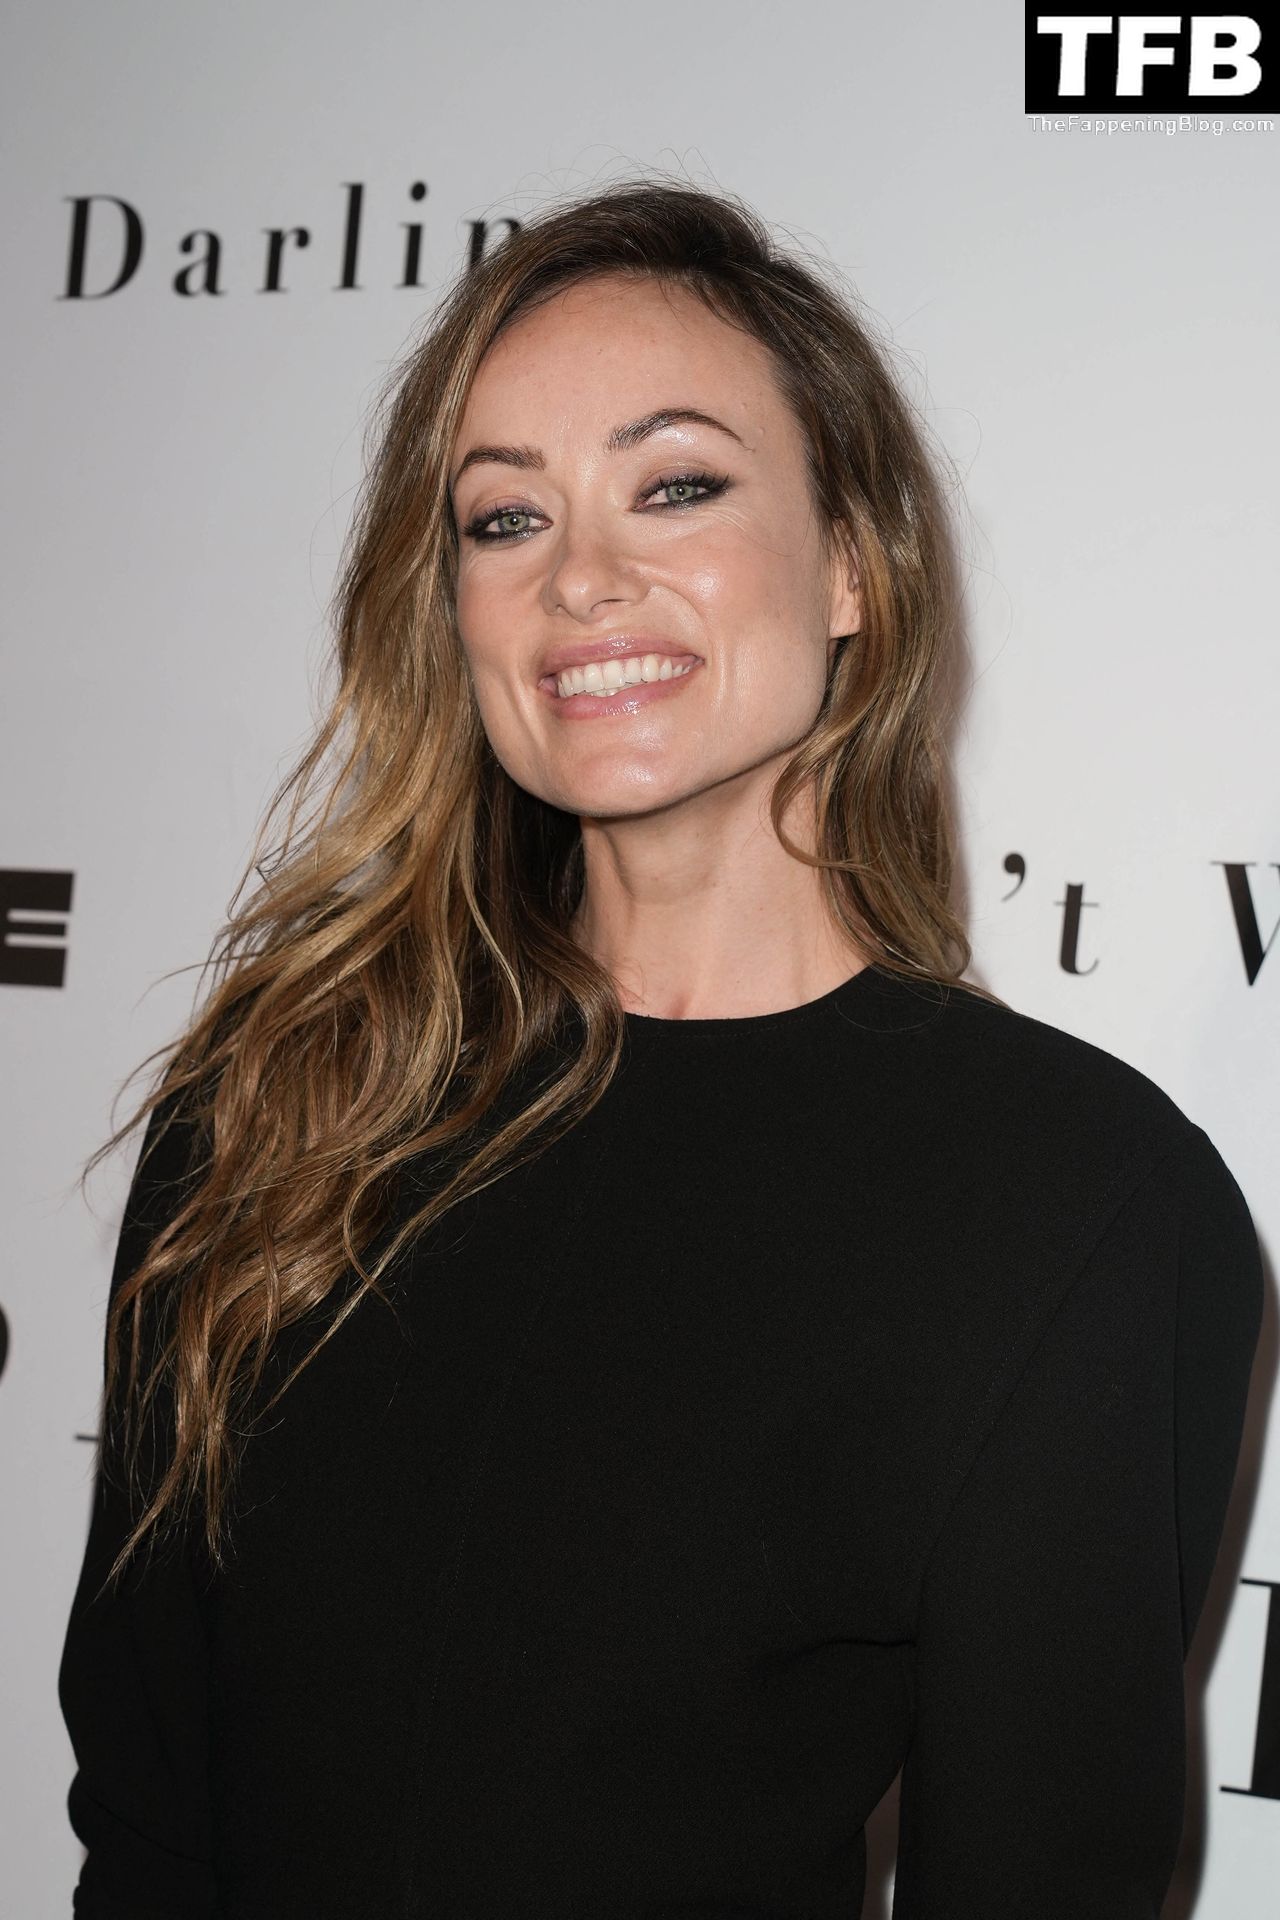 Olivia-Wilde-Sexy-The-Fappening-Blog-58-1.jpg